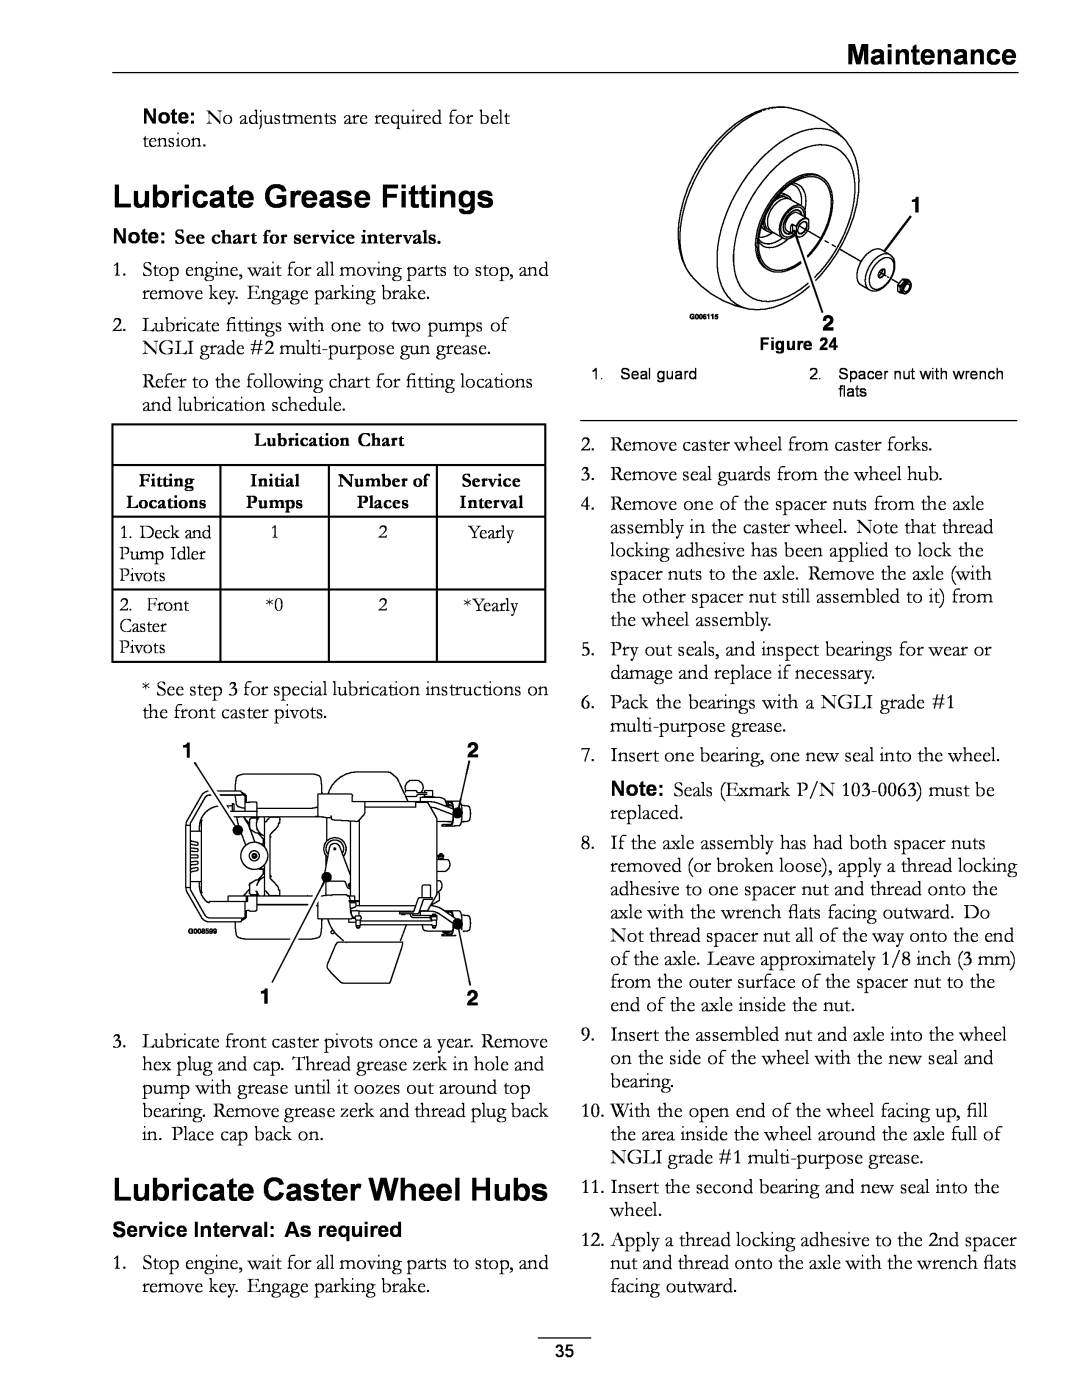 Exmark 4500-872 Lubricate Grease Fittings, Lubricate Caster Wheel Hubs, Note See chart for service intervals, Maintenance 